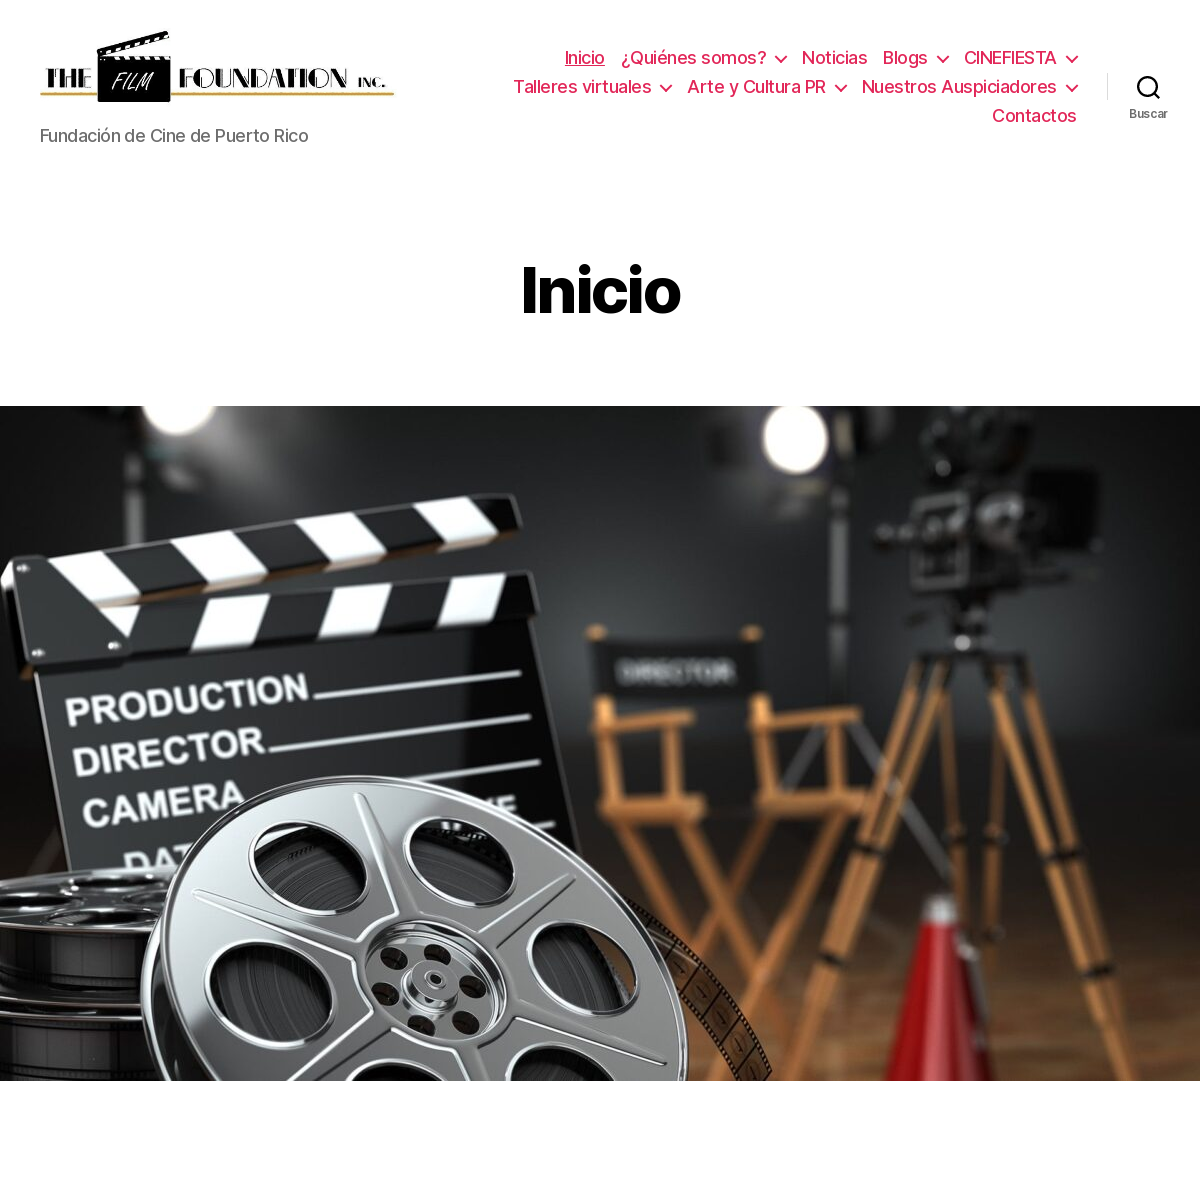 A complete backup of fundacioncinepr.org